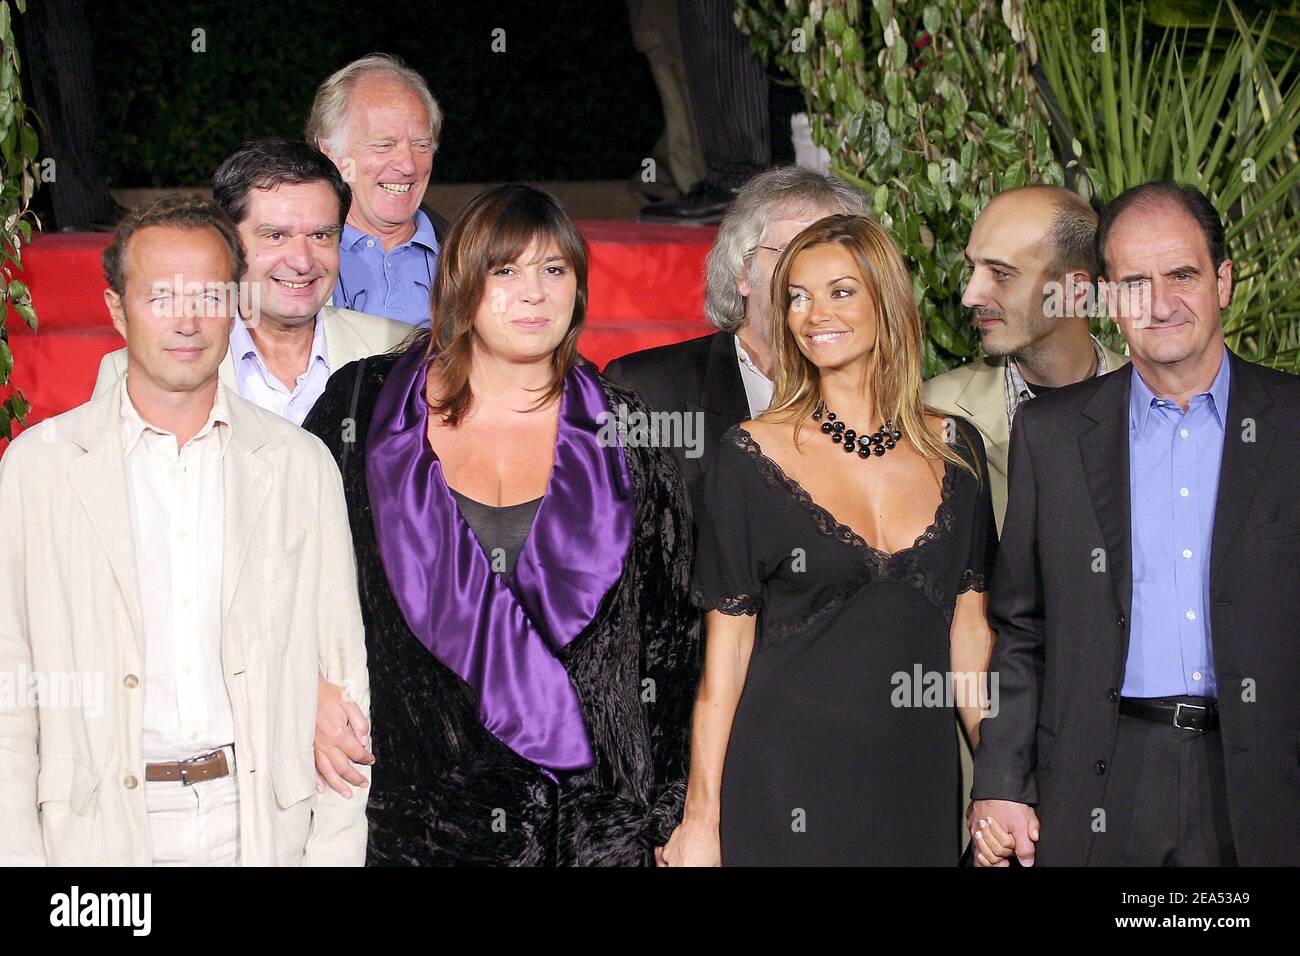 The jury, Pierre Lescure, Peter Kassovitz, Michle Bernier, Ingrid Chauvin, Grard Carr, Eric Neveux, Laurent Mallet attend the closing ceremony of the 7th Festival of TV fiction in Saint-Tropez, France on September 17, 2005. Photo by Gerald Holubowicz/ABACAPRESS.COM Stock Photo